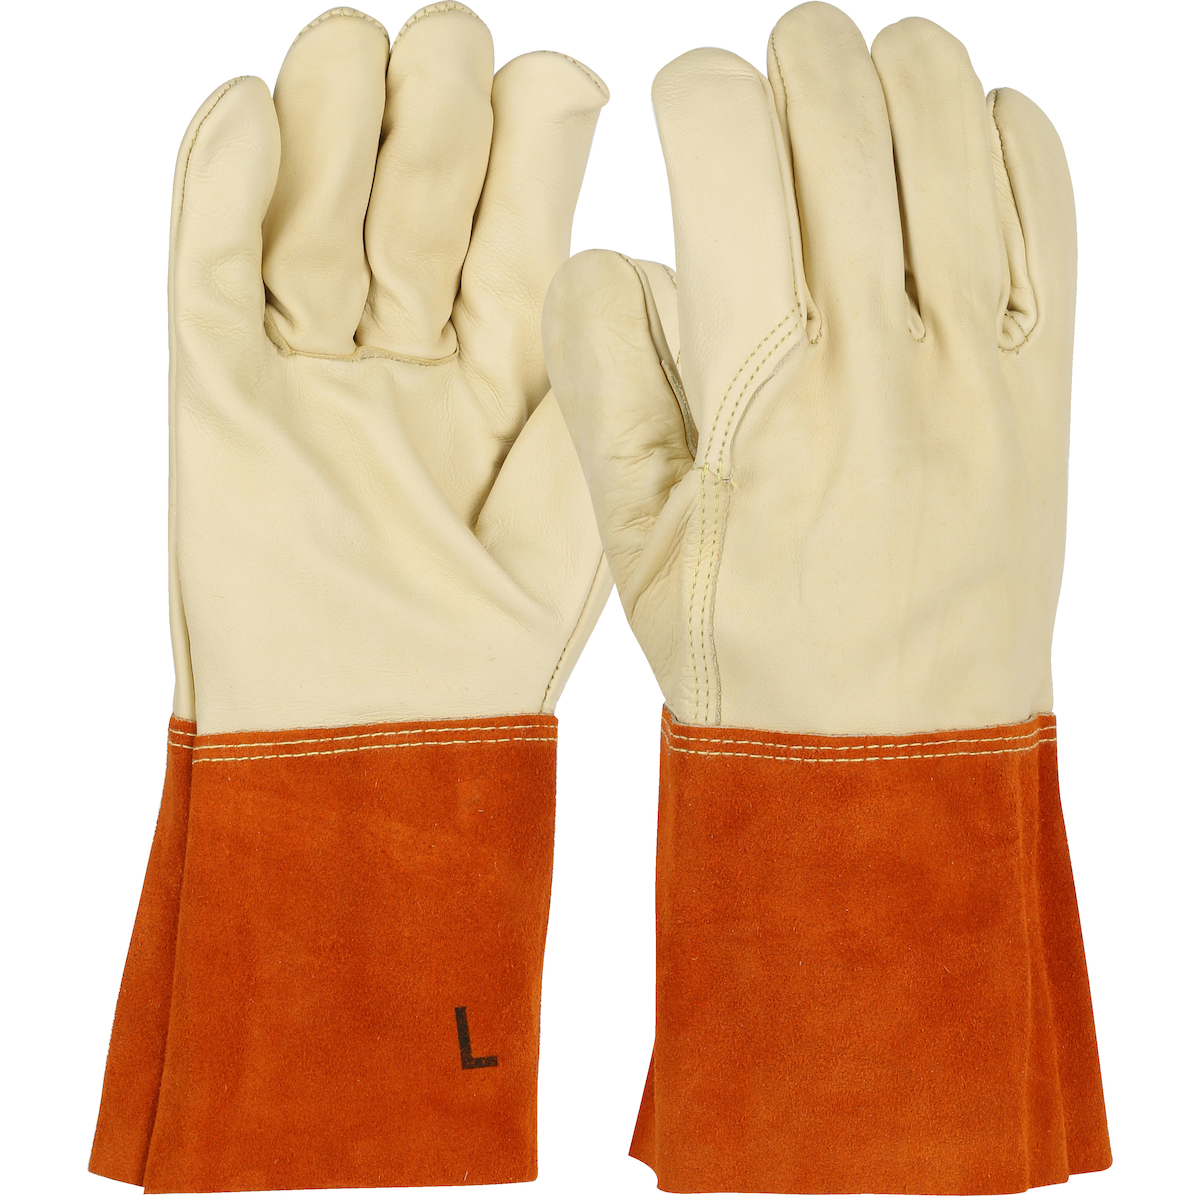 6000 PIP® Ironcat Top Grain Cowhide Leather Mig Tig Welder's Glove with Aramid Stitching - Split Leather Gauntlet Cuff